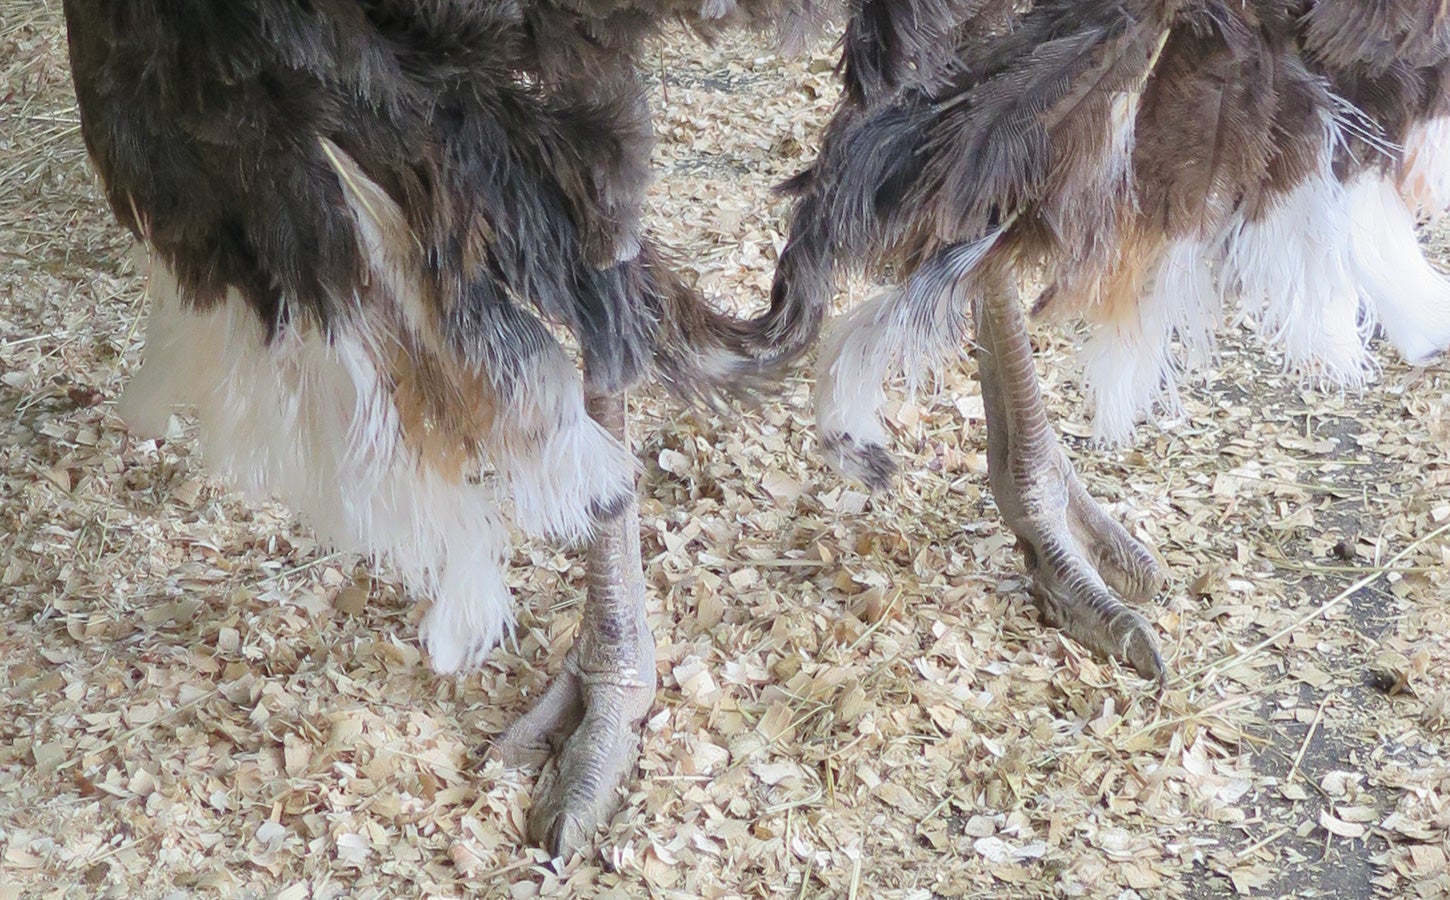 An ostrich's legs and feet with two large toes on each foot